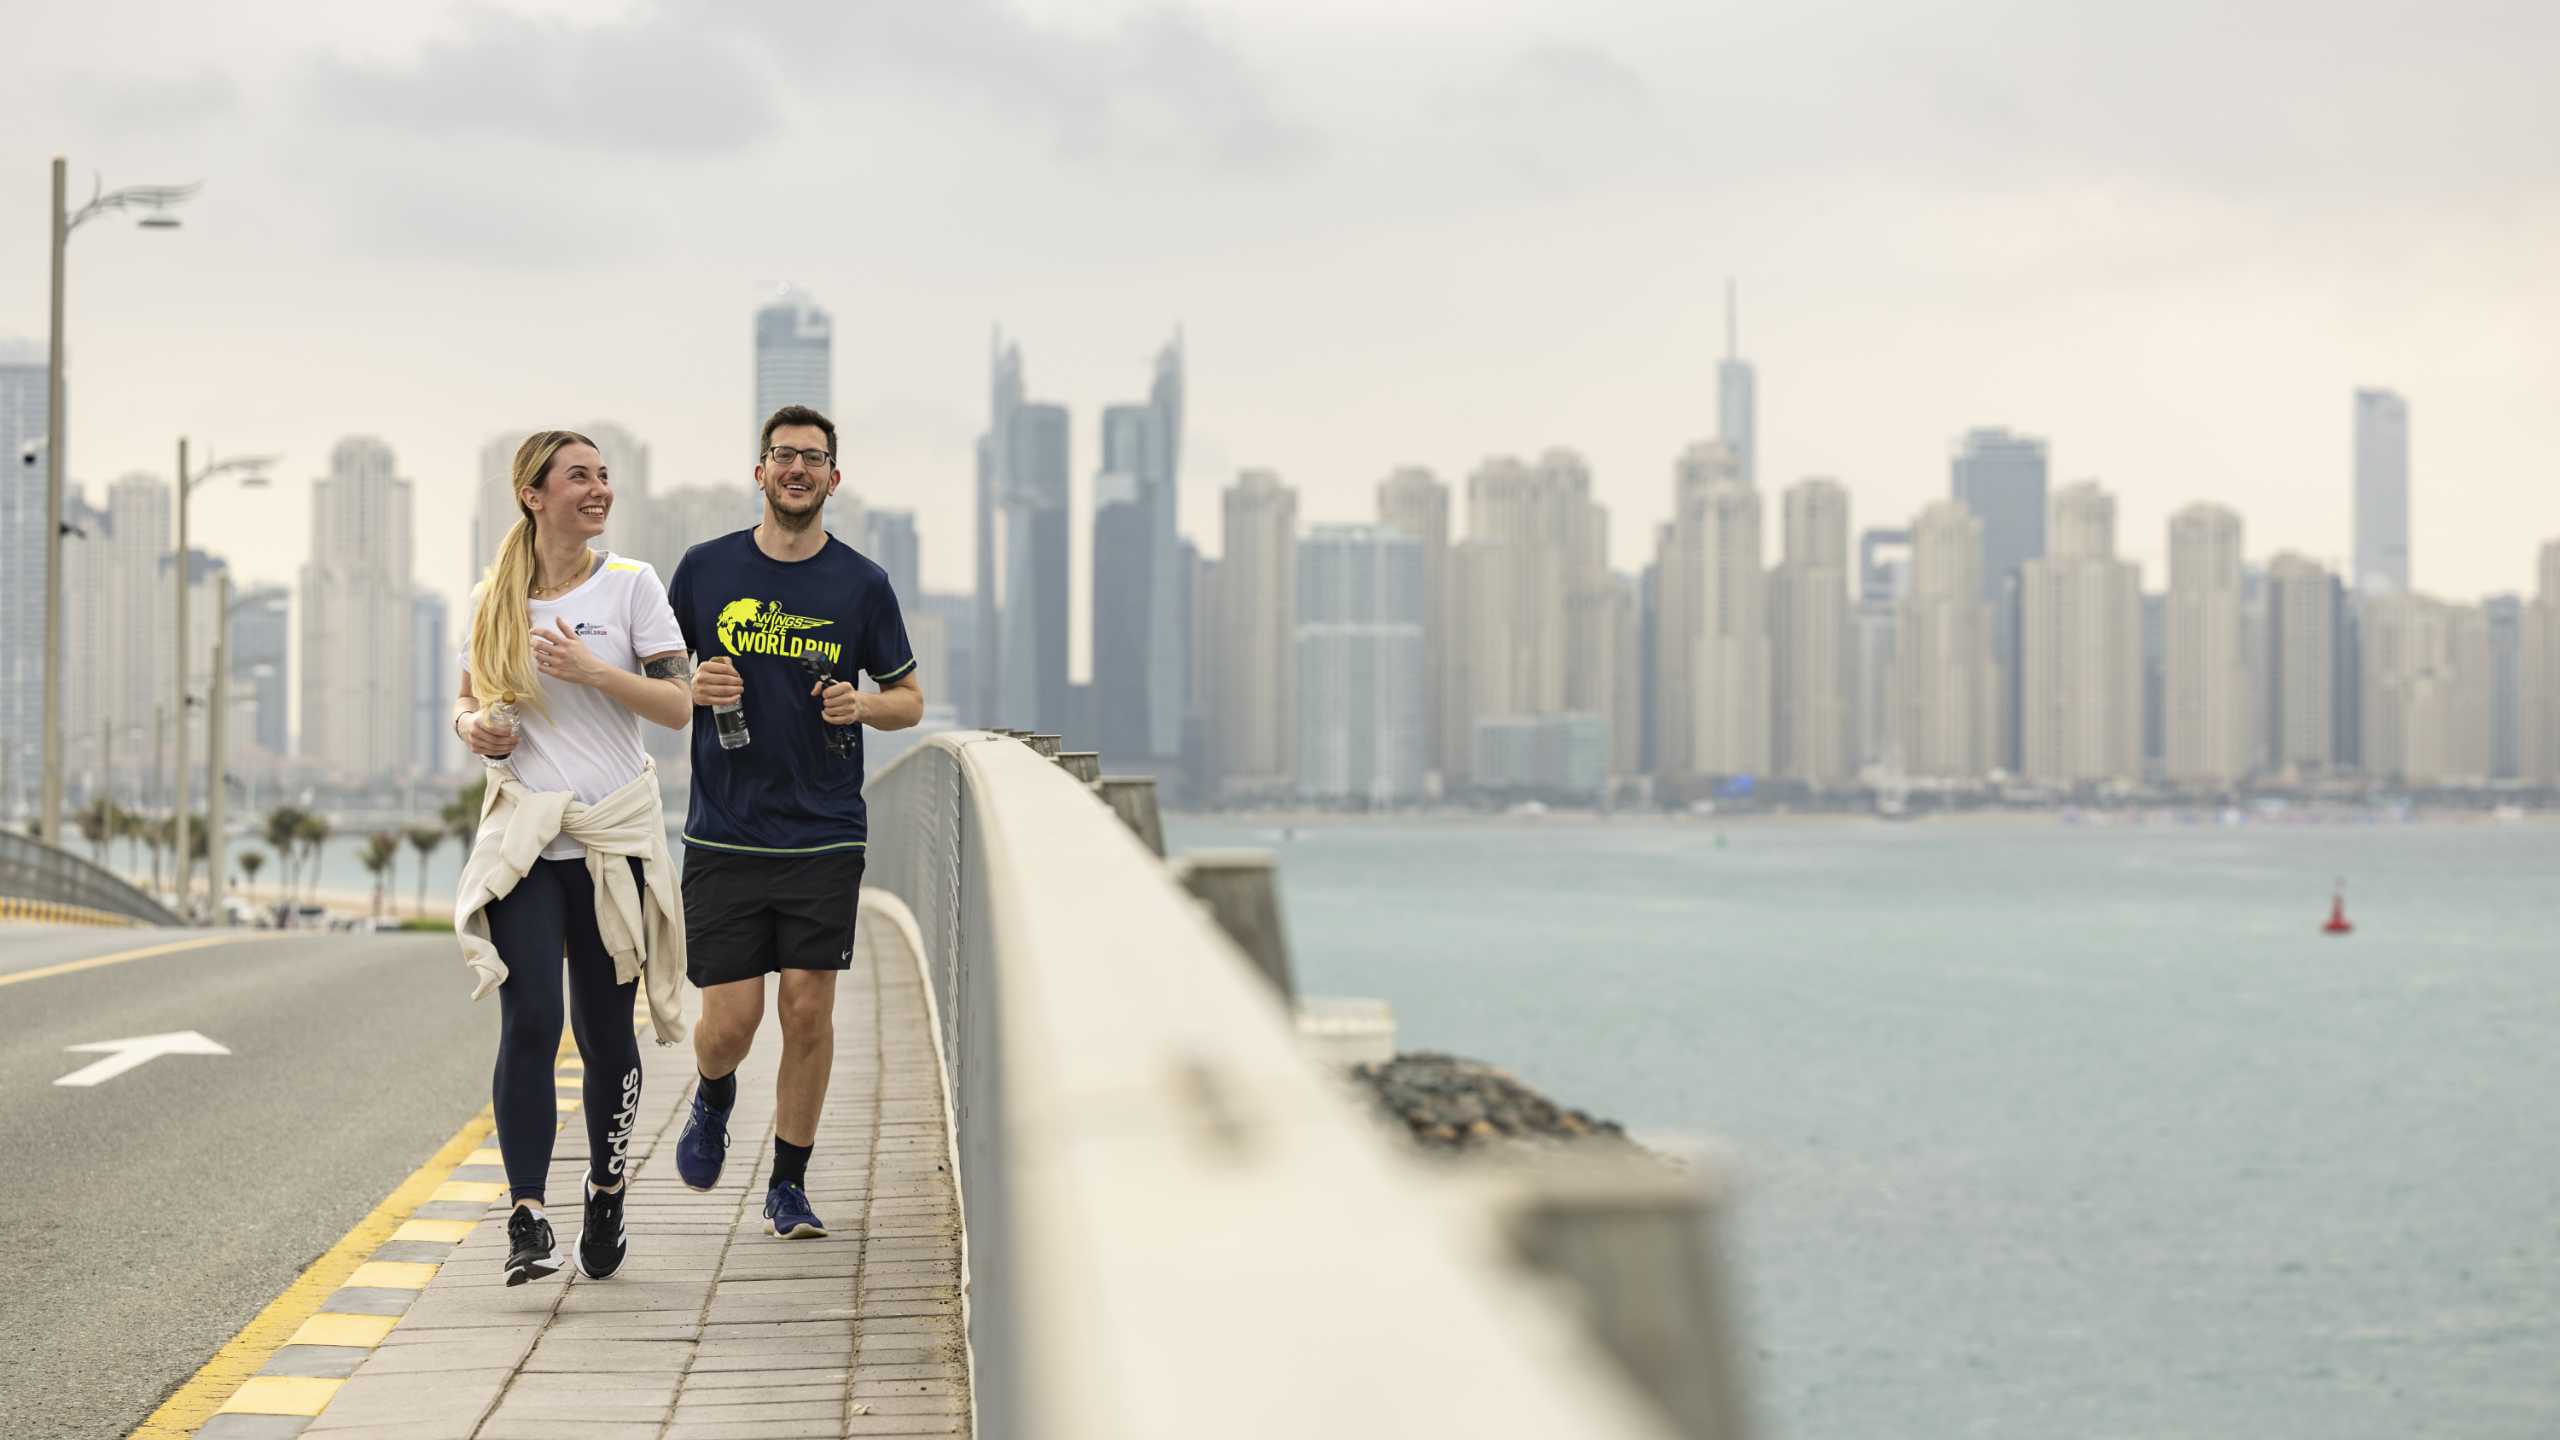 Wings for Life World Run – Engages the gaming community